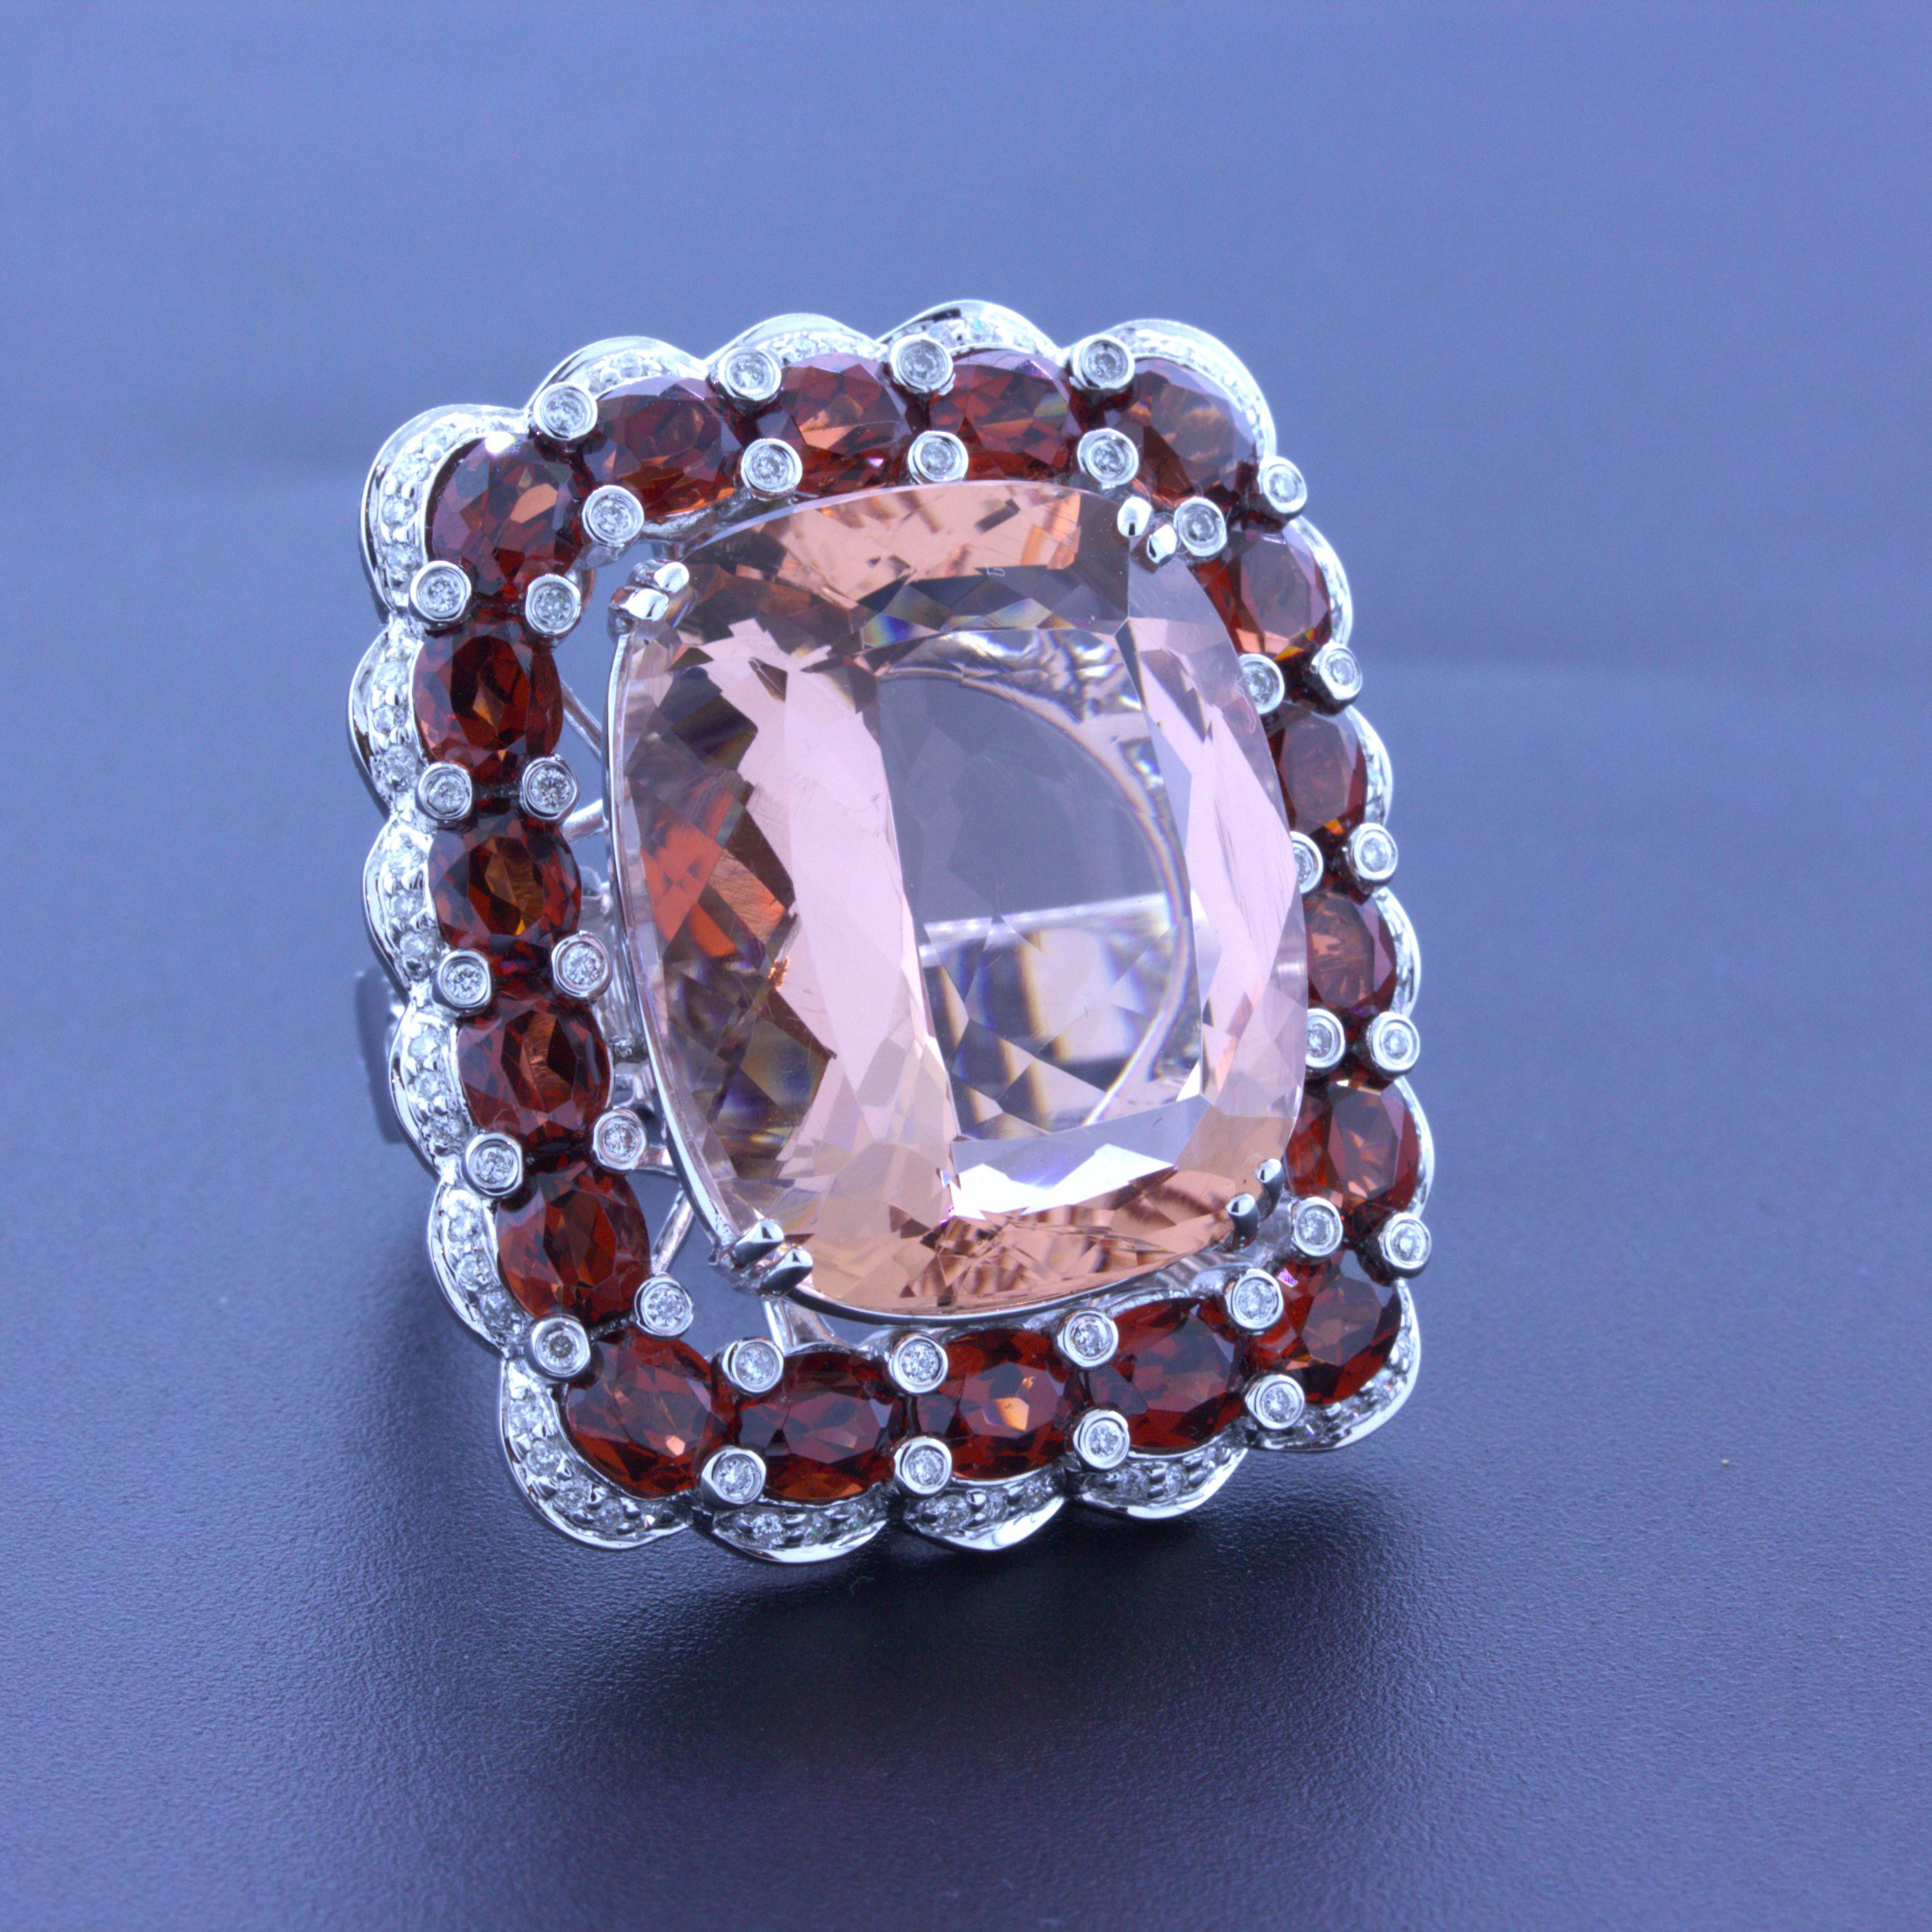 A very large and unique cocktail ring featuring a substantial 30.39 carat morganite! The morganite has a precise and proportional cushion-shape along with a lovely rosy-peach color that glows in the light. It is complemented by a halo of oval-shaped